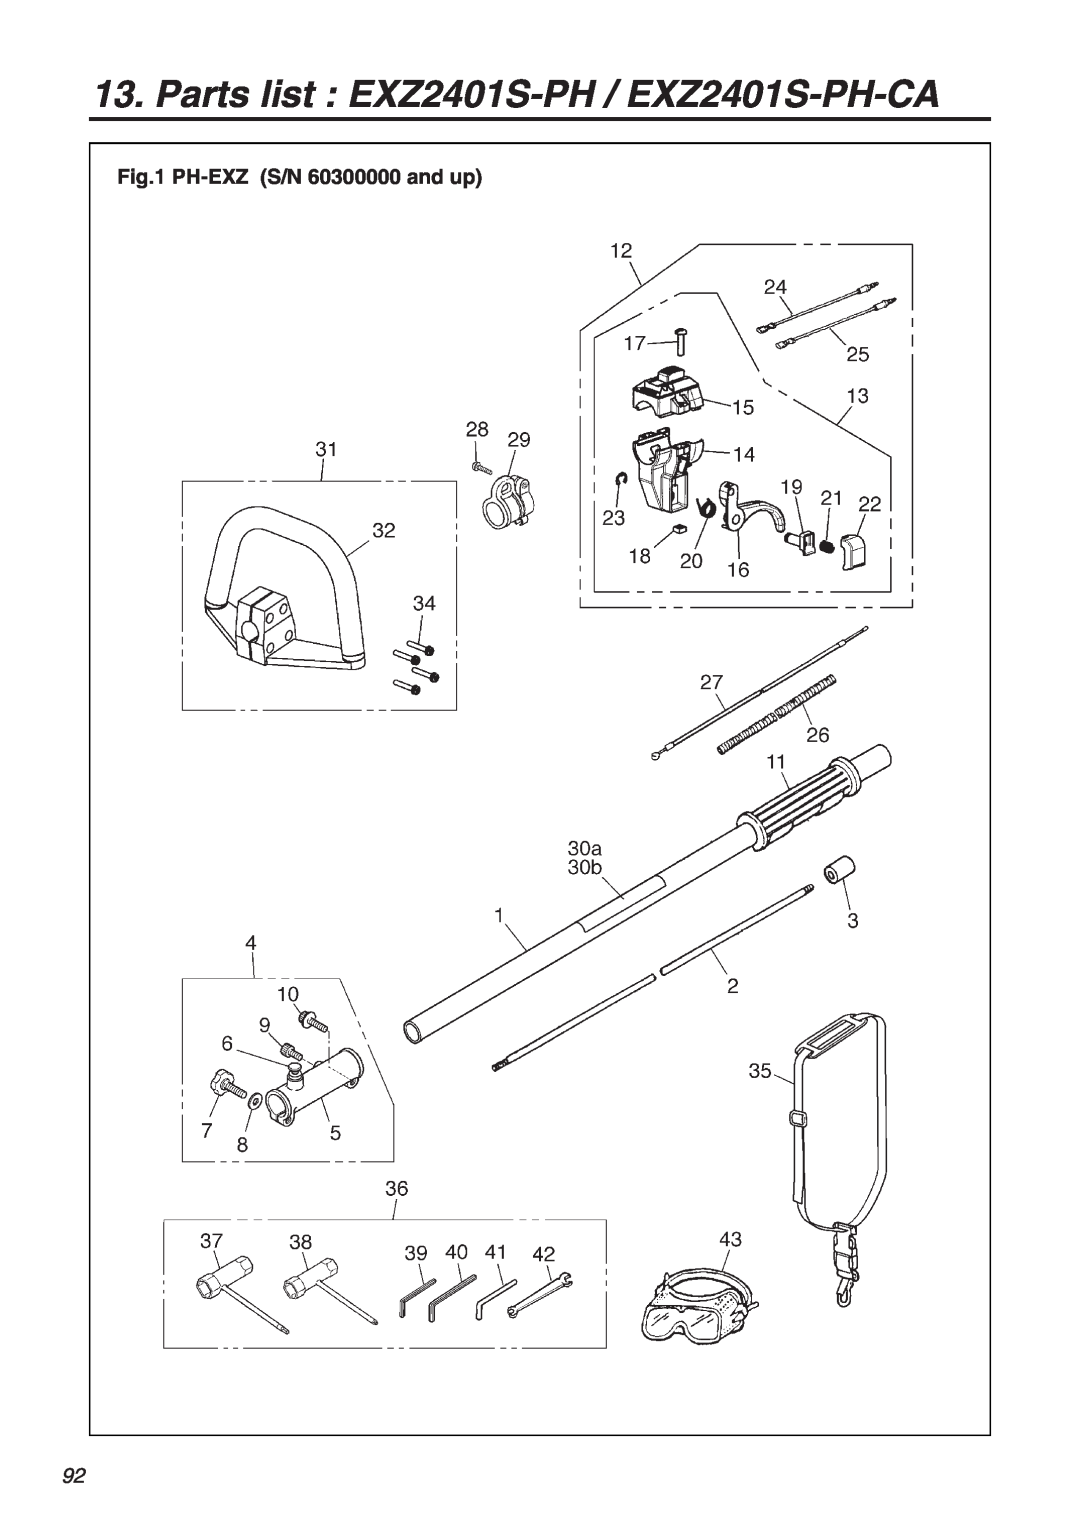 RedMax manual Parts list EXZ2401S-PH / EXZ2401S-PH-CA, PH-EXZ S/N 60300000 and up 